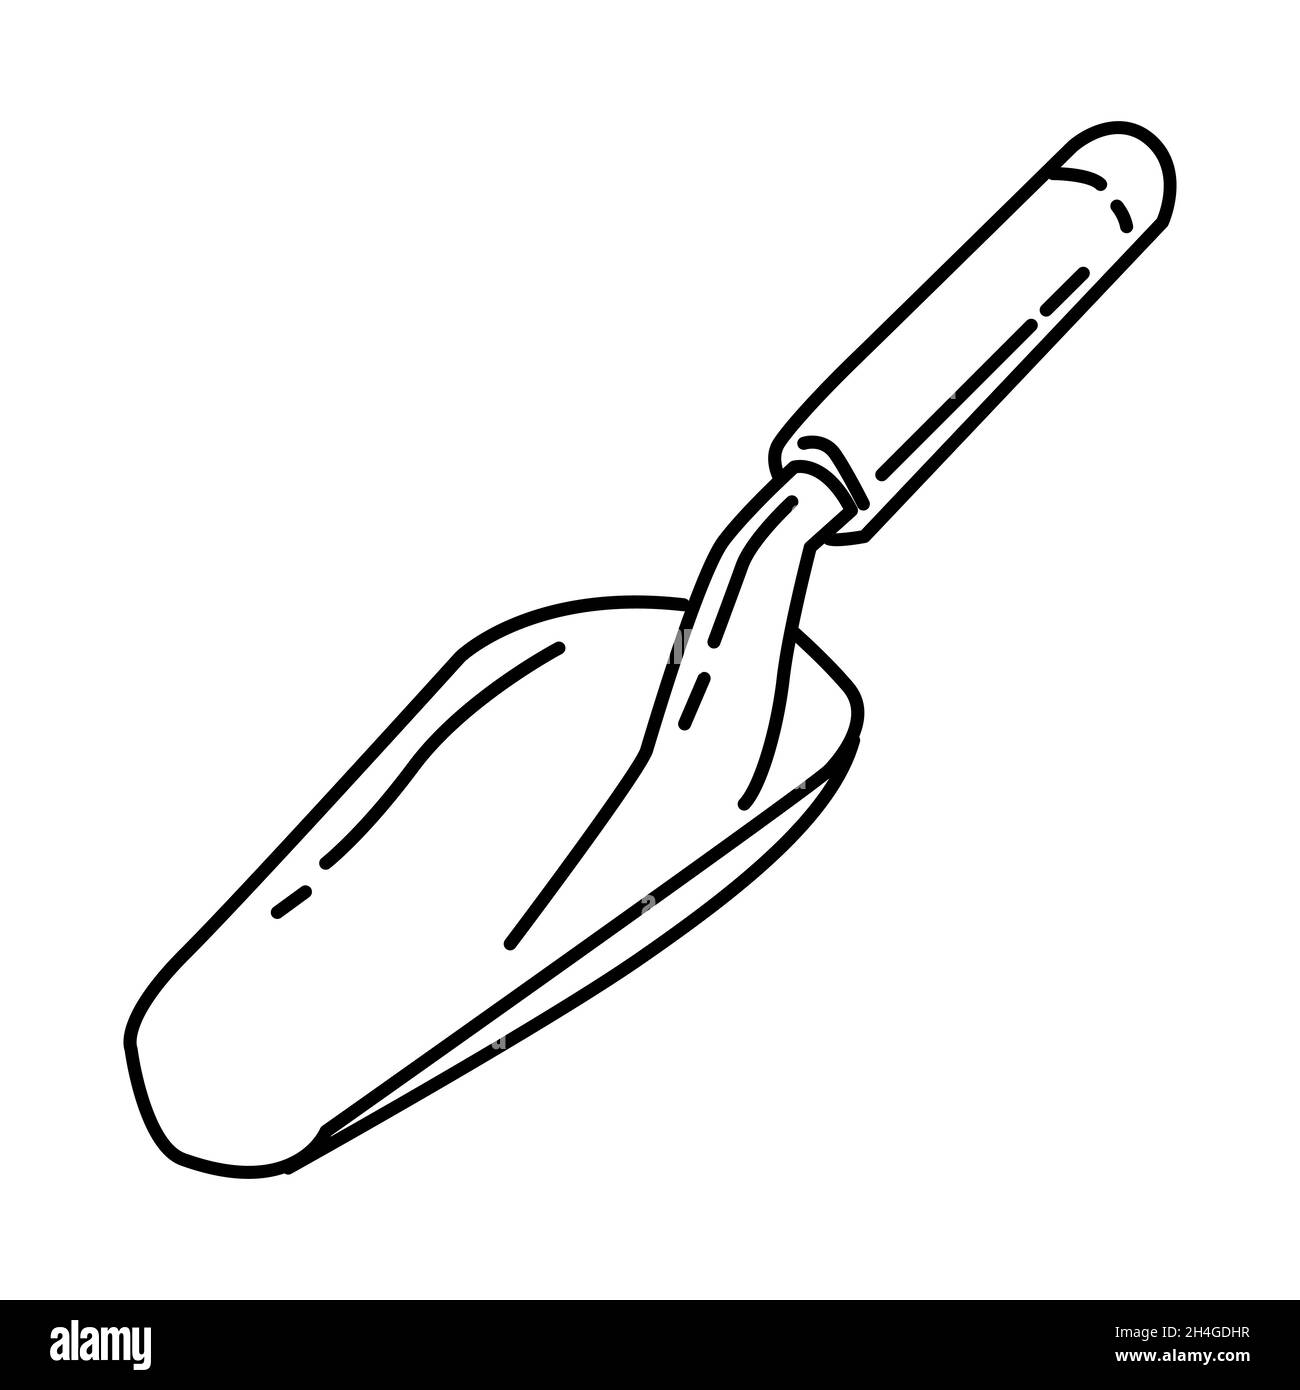 Trowel Part of Contractor Material and Equipment Device Hand Drawn Icon Set Vector. Stock Vector